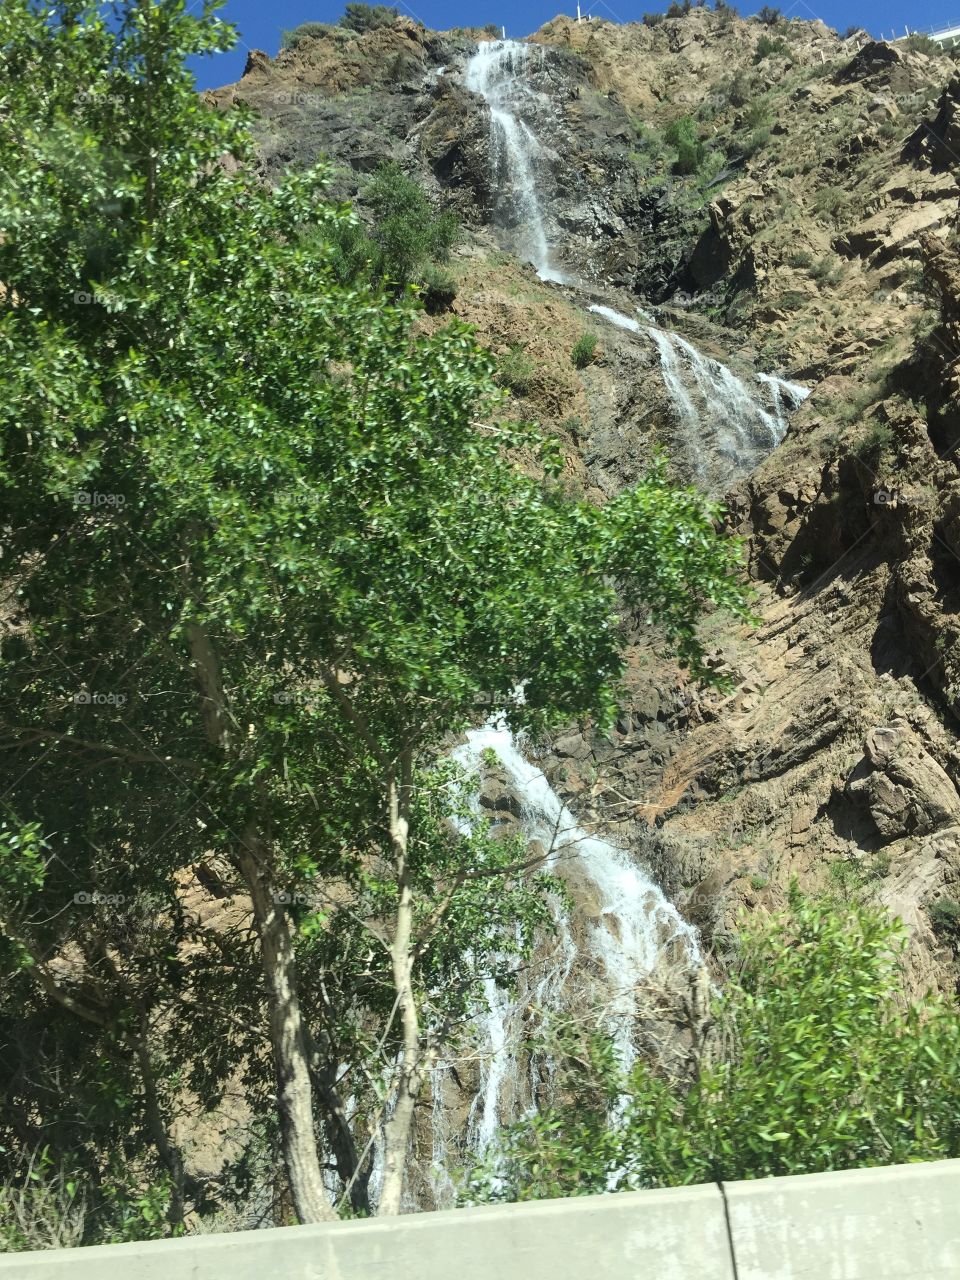 This waterfall is near my house and has been a great part of my childhood. The white, green, and brown has always been a eye popping feature for me. I love water and love spending time with it. 